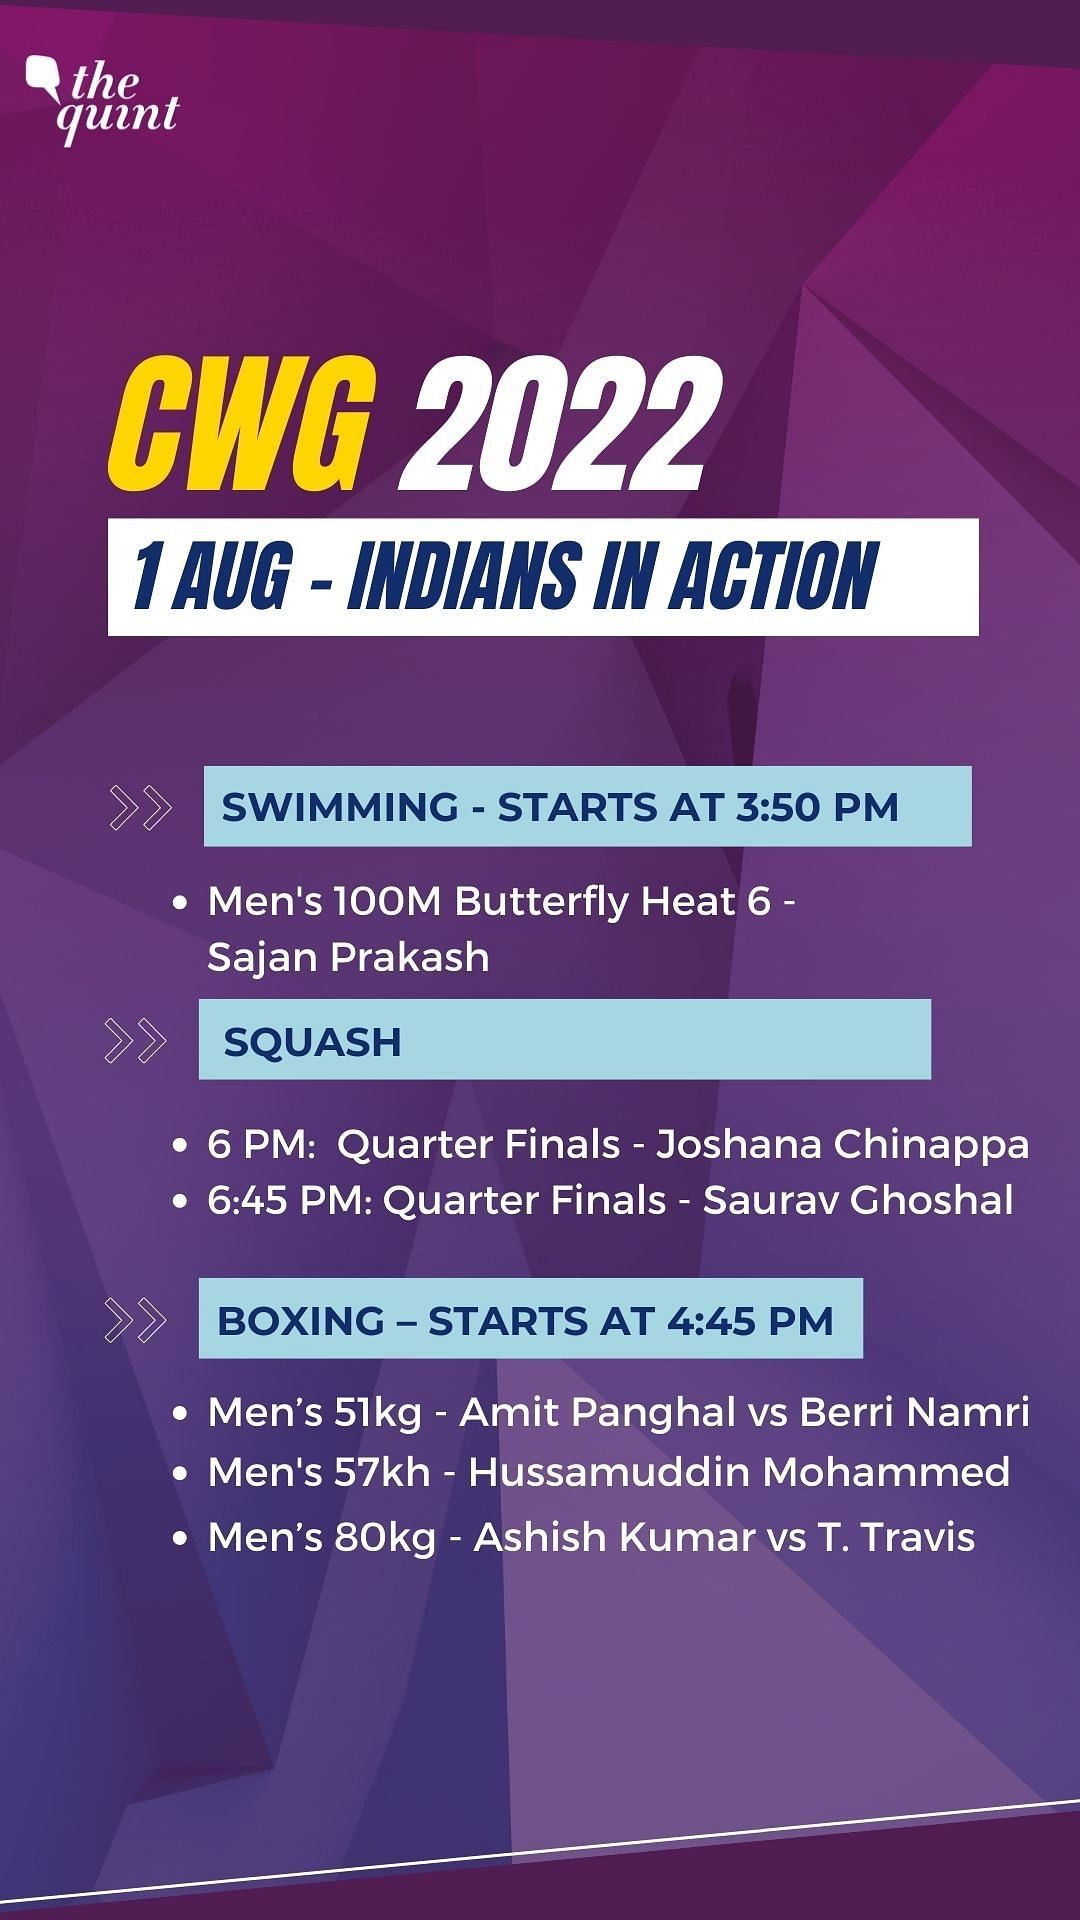 The Indian Men’s Hockey team will square off against England on Day 4 of CWG 2022.